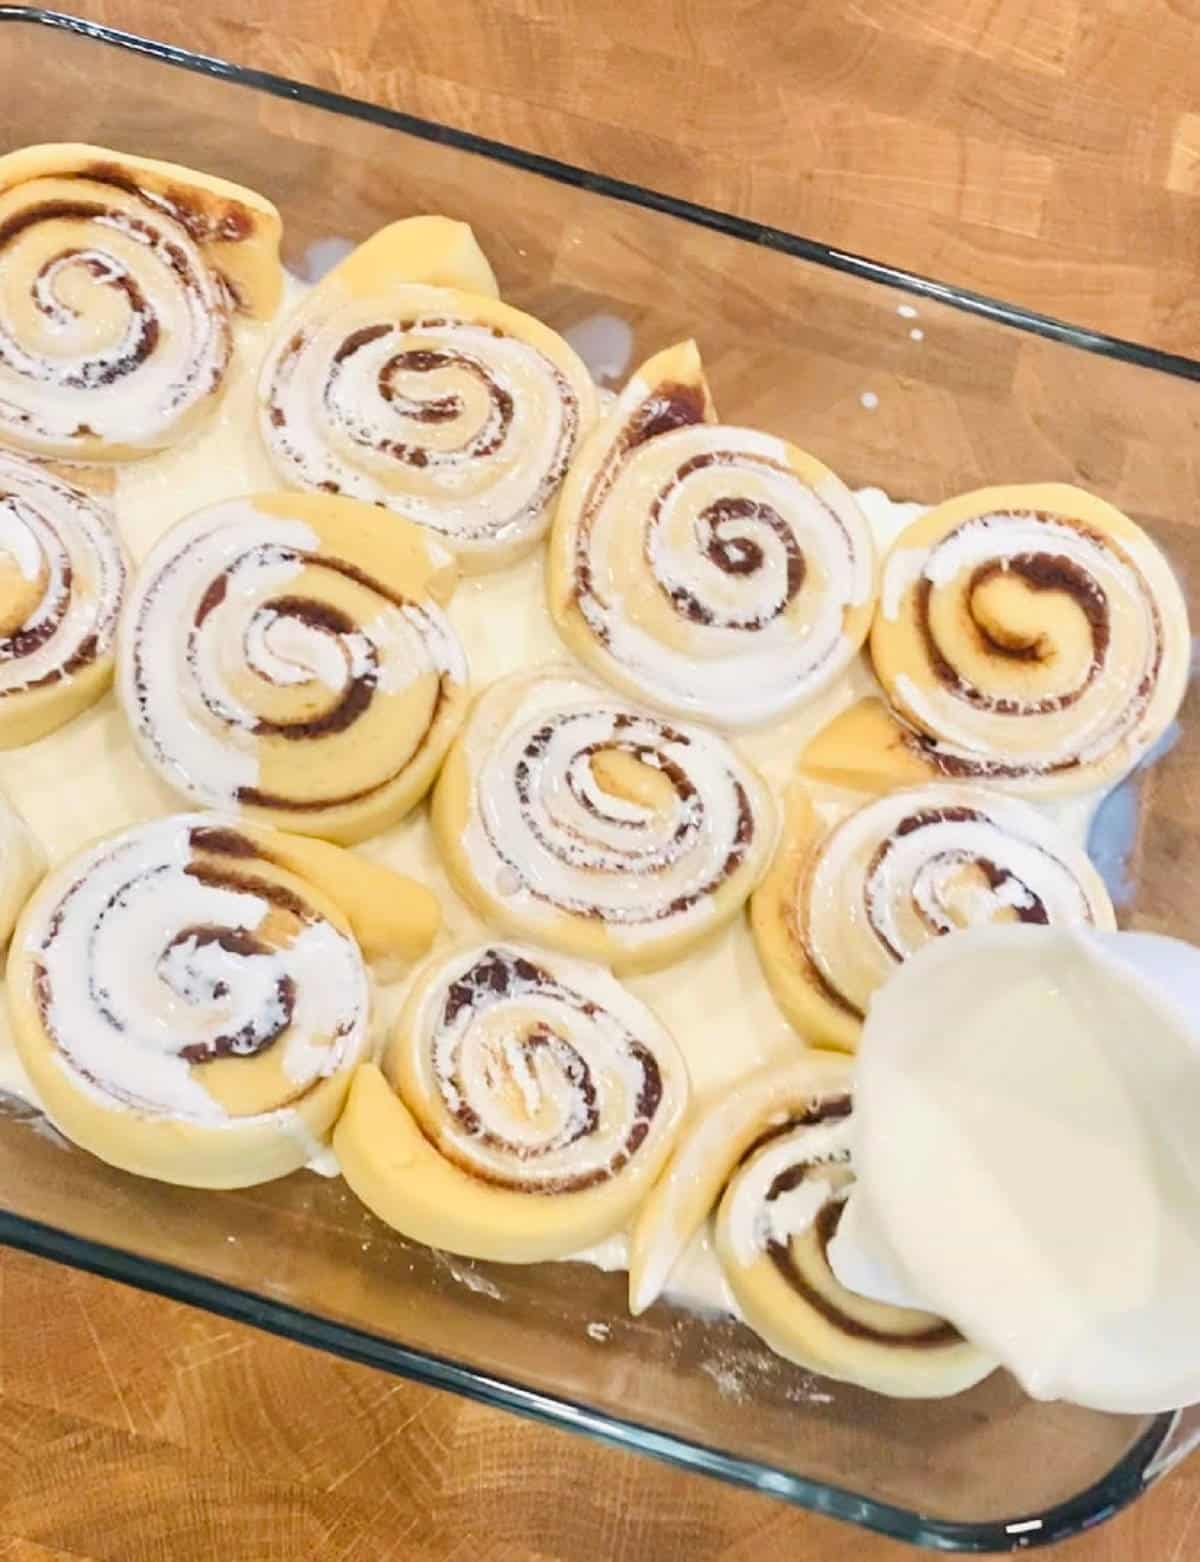 rhodes cinnamon rolls with heavy cream being poured on top.